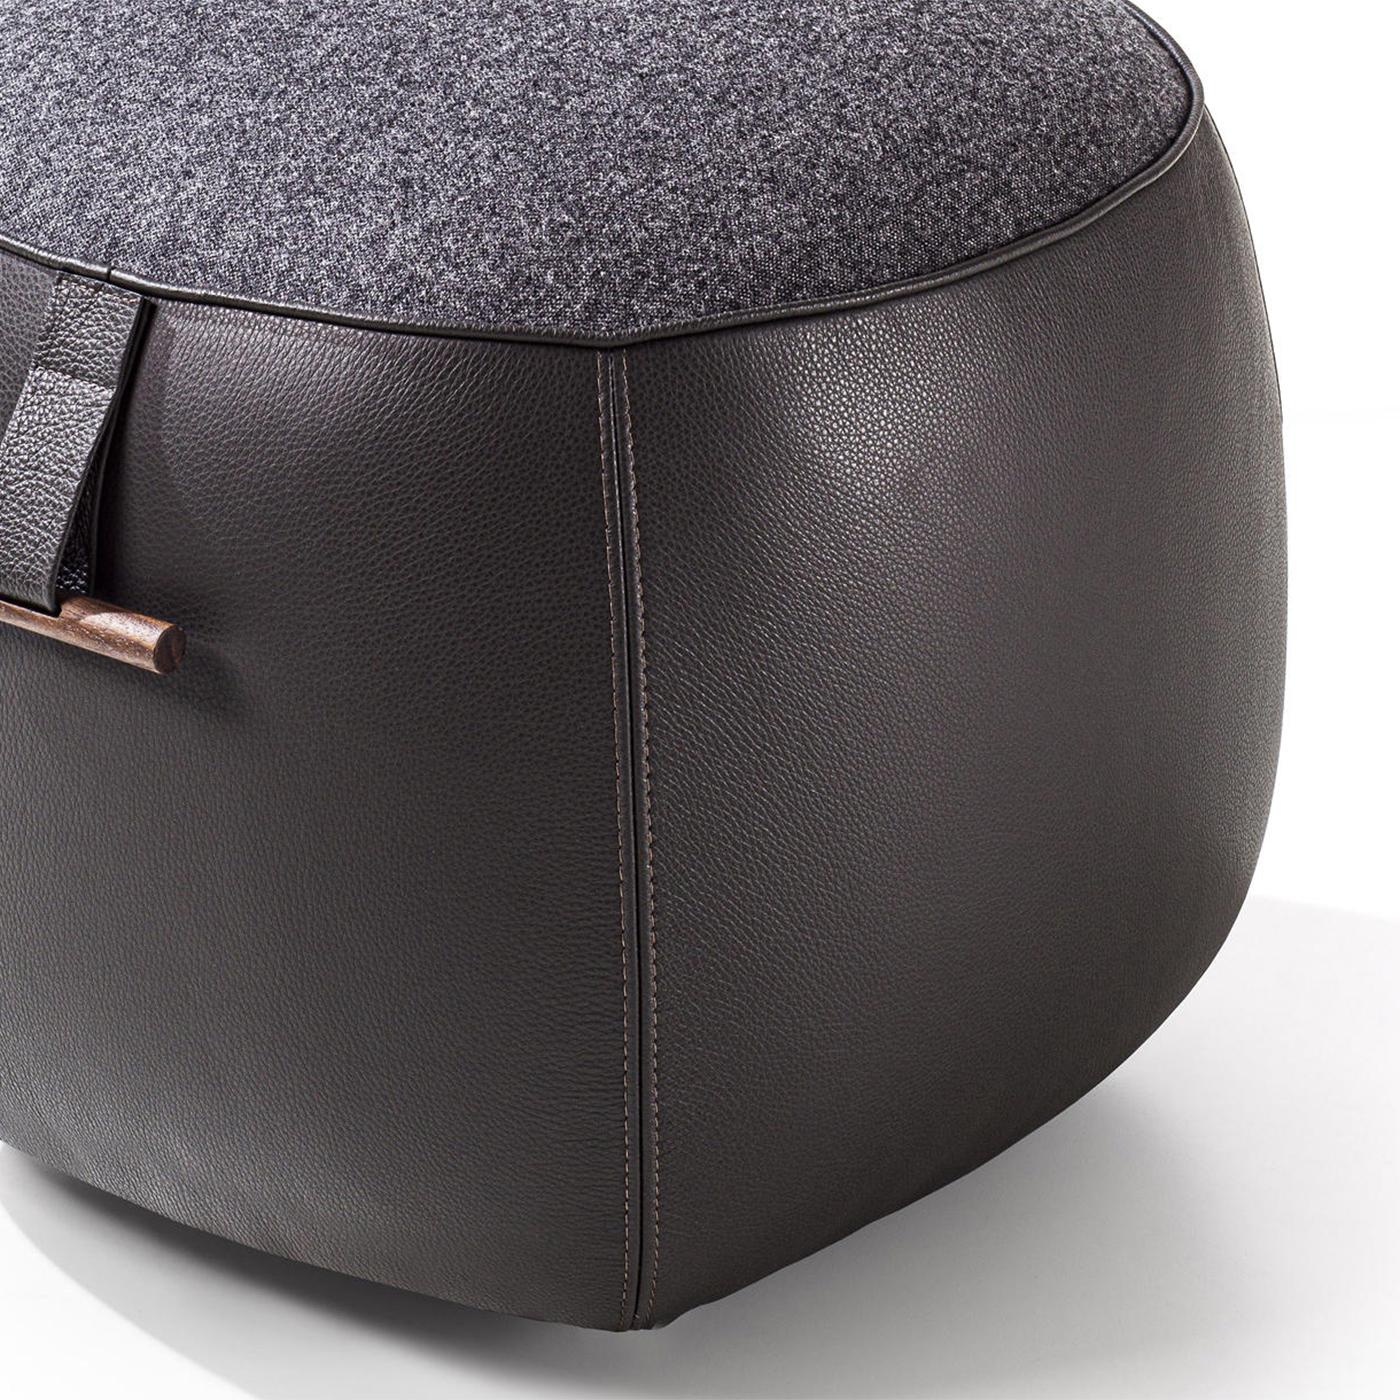 Berlingo Small Pouf In New Condition For Sale In Paris, FR